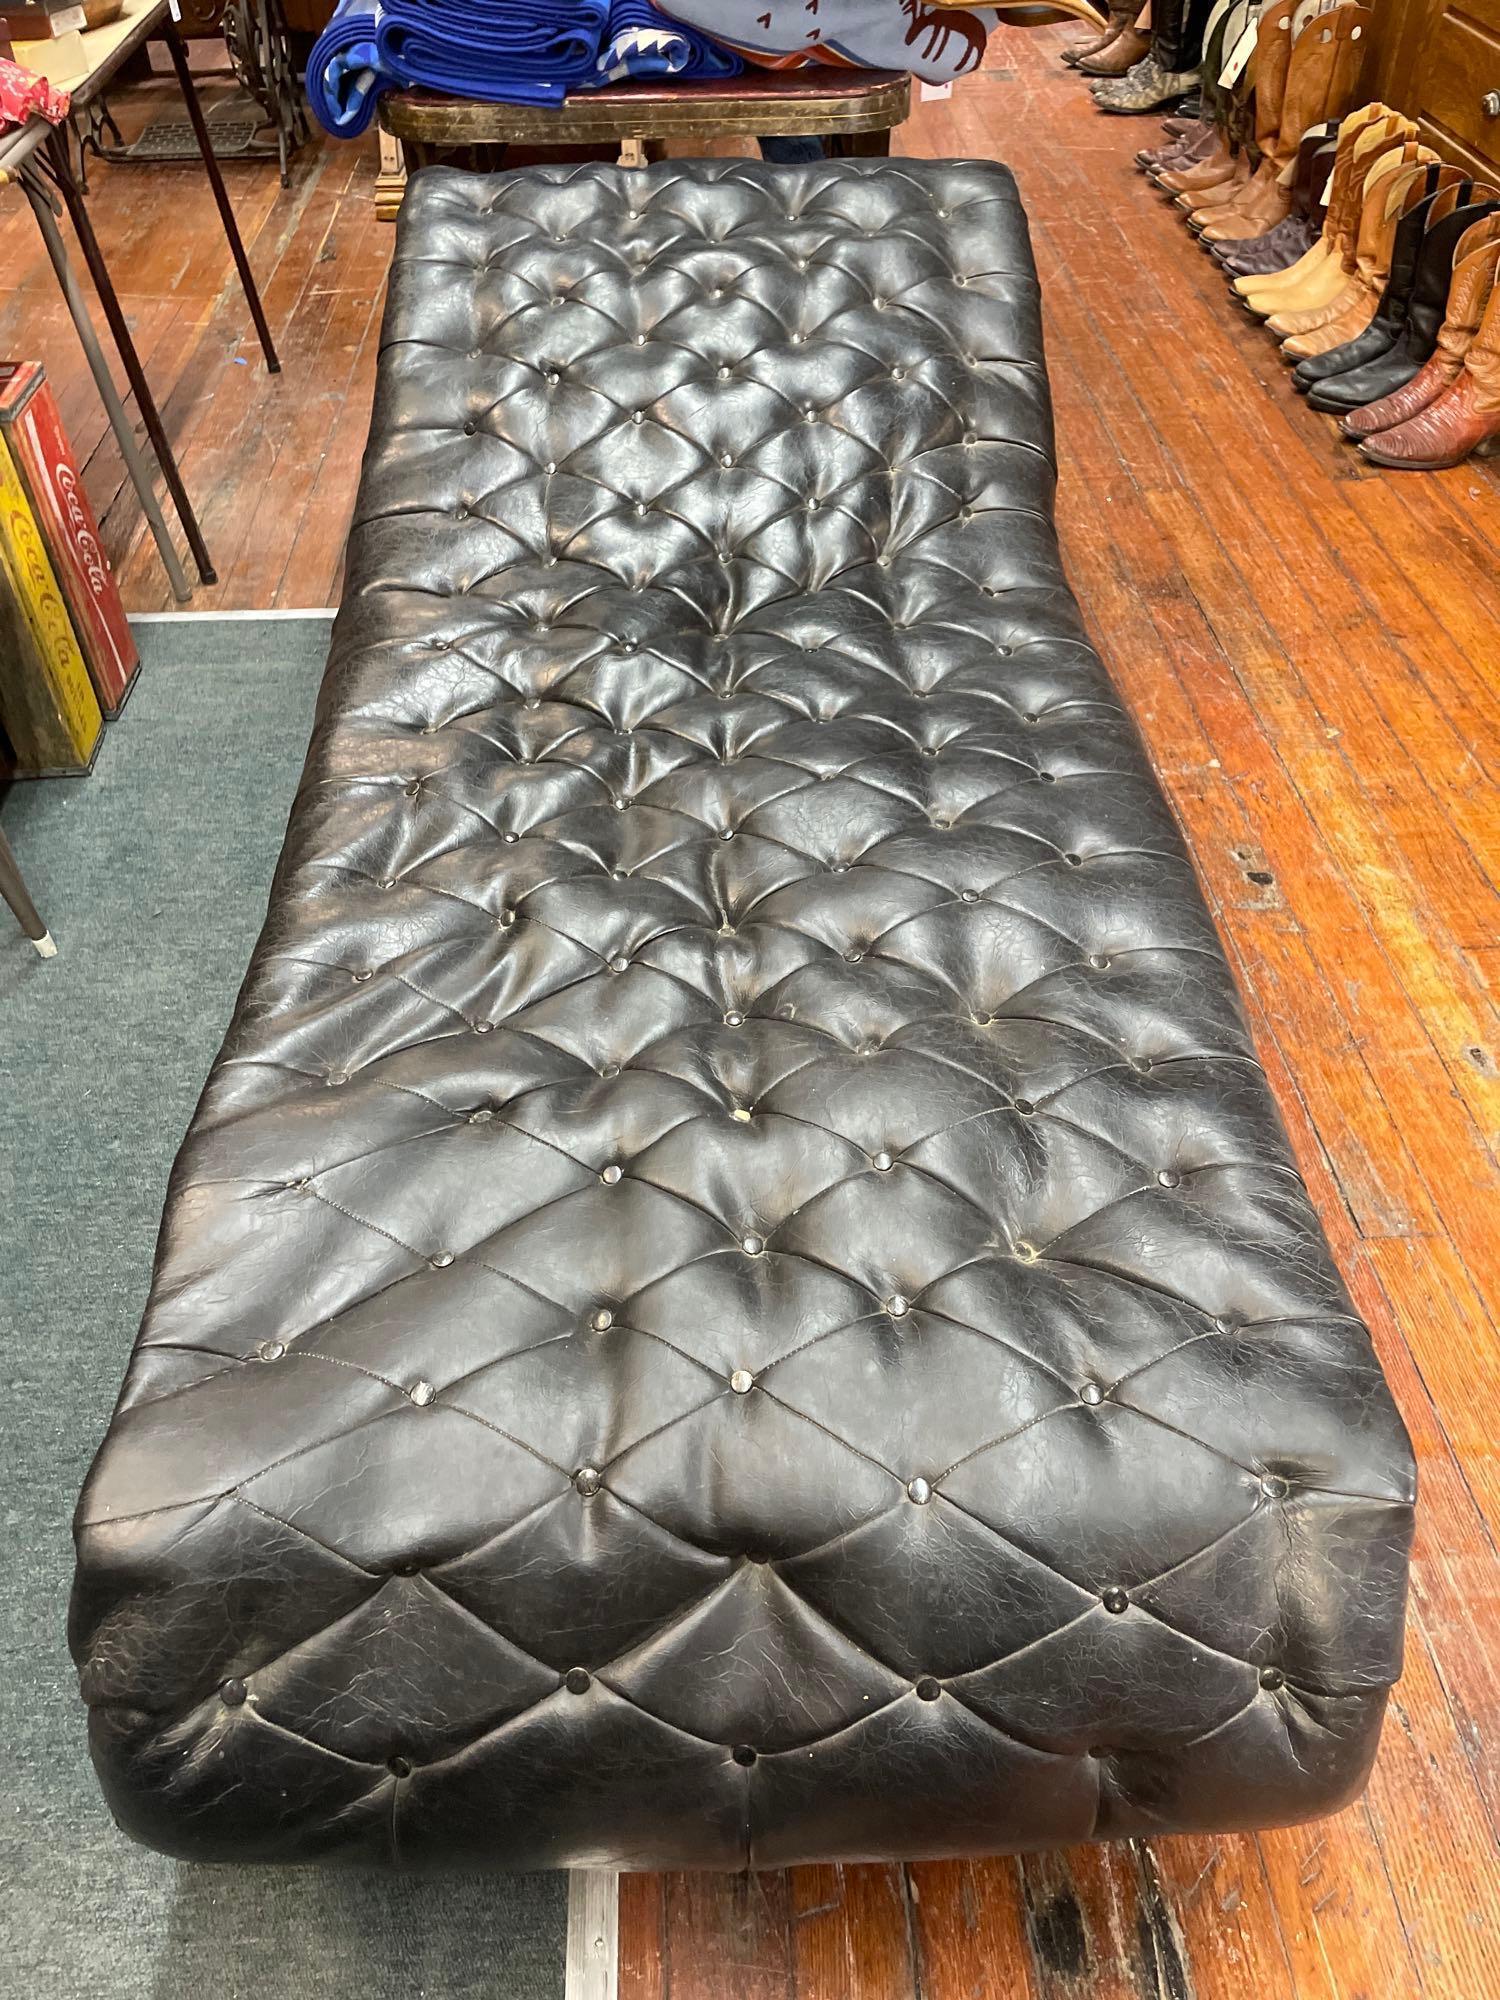 1900's Leather Fainting couch